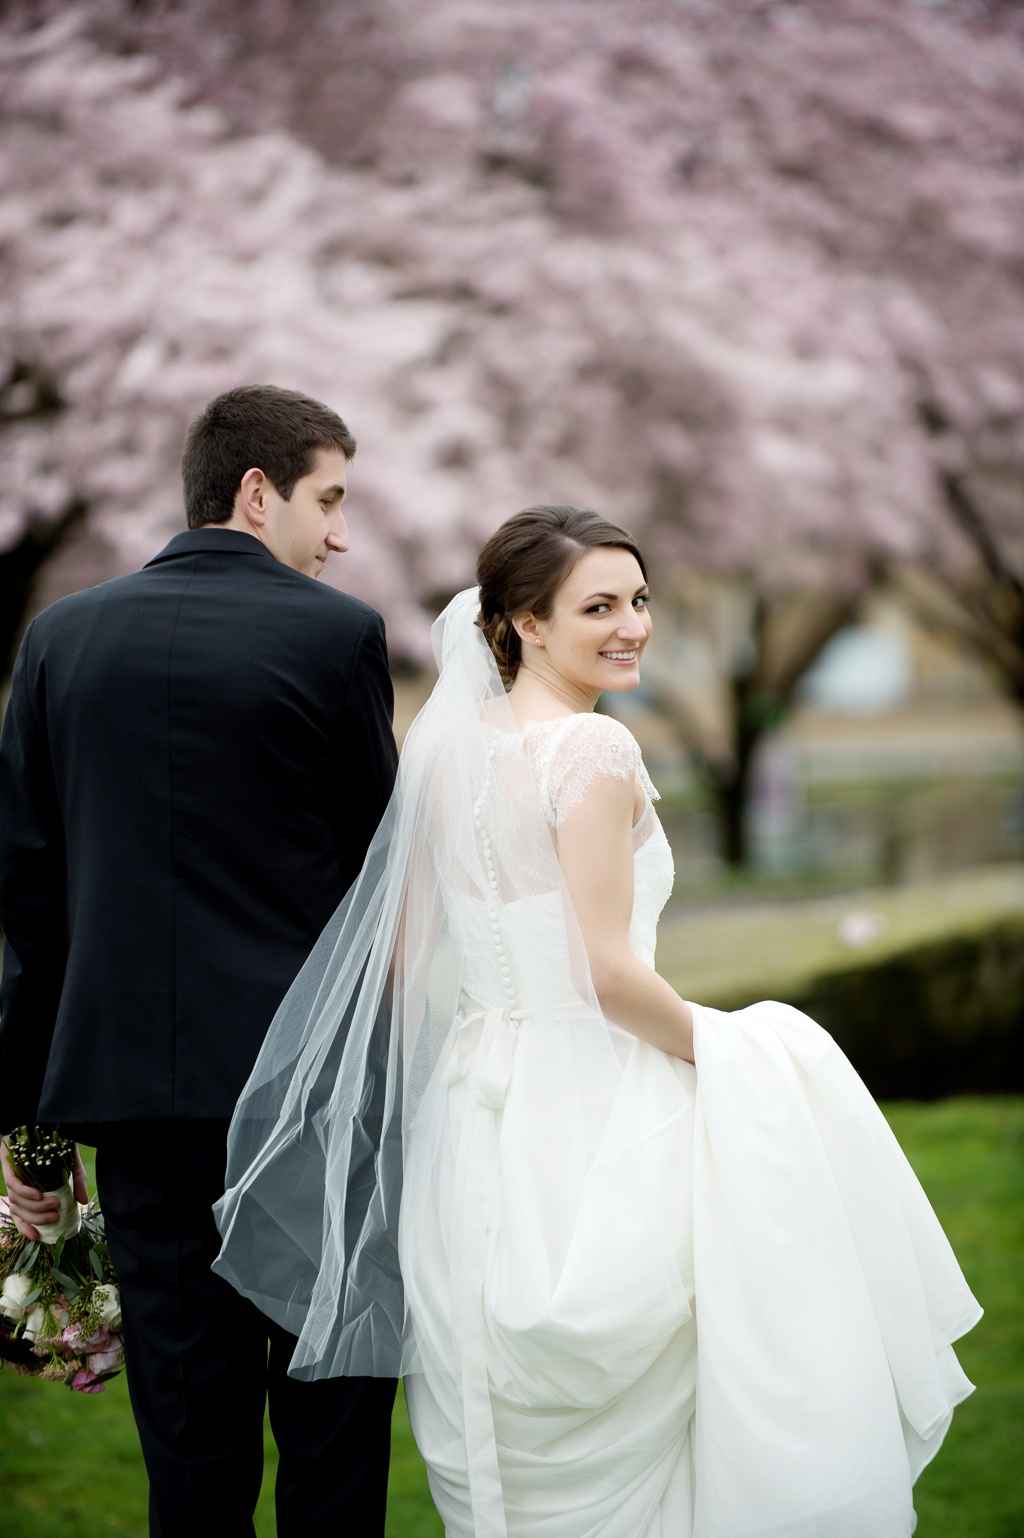 a bride looks over her shoulder as she walks with her groom underneath cherry blossom trees